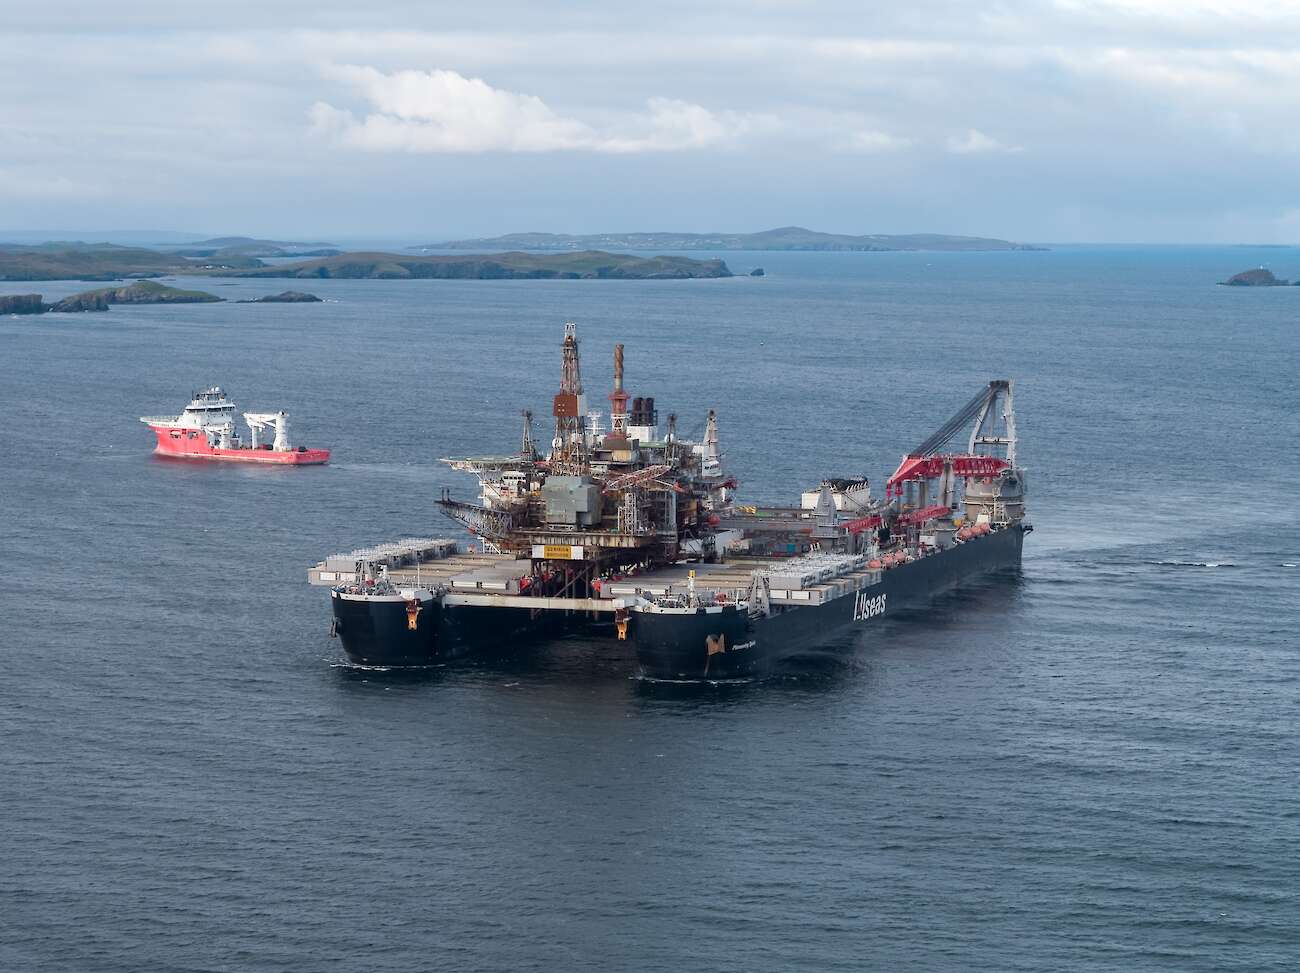 Lerwick, Shetland: Pioneering Spirit, the world’s largest construction vessel, arrives in Dales Voe with the 14,200 tonne Ninian Northern topside for decommissioning. Credit: Rory Gillies/Shetland Flyer Aerial Media.